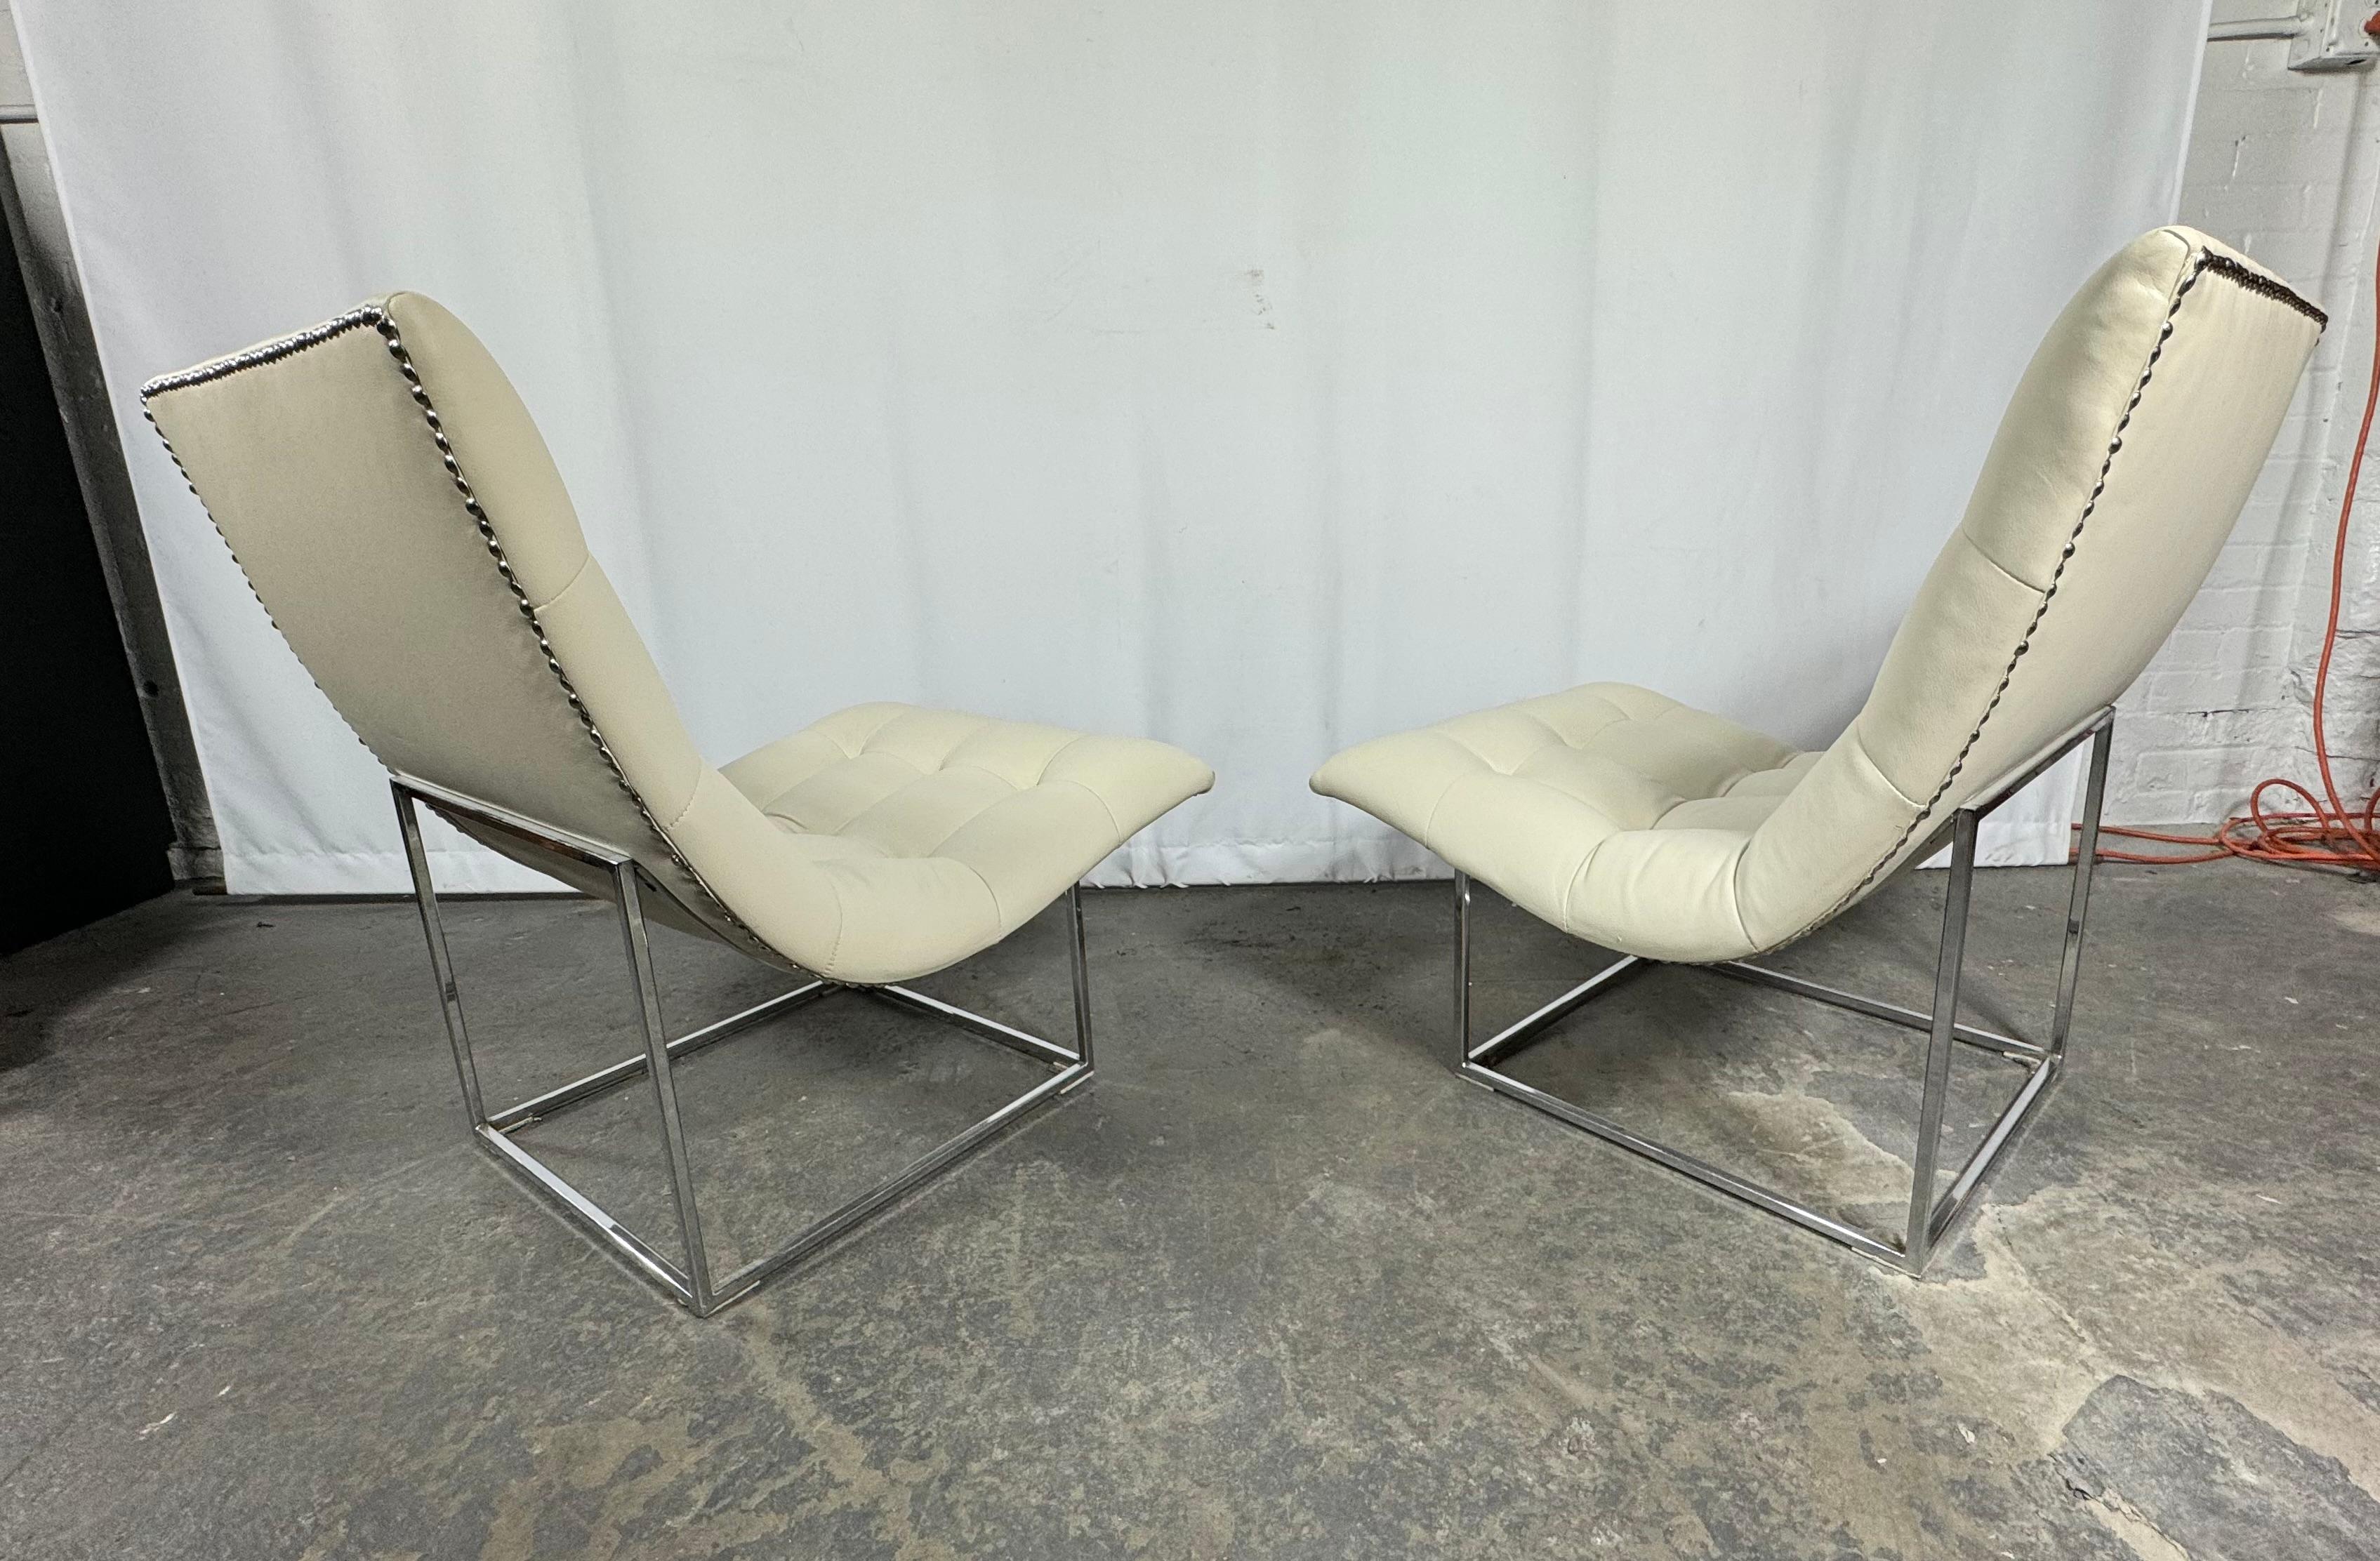 Stunning Pair of Milo Baughman / Thayer Coggin Lounge Scoop Chairs,, Professionally reupholstered in a butter soft white leather, Original chrome frames,, Super stylish and extremely comfortable. Hand delivery avail to New York City or anywhere en